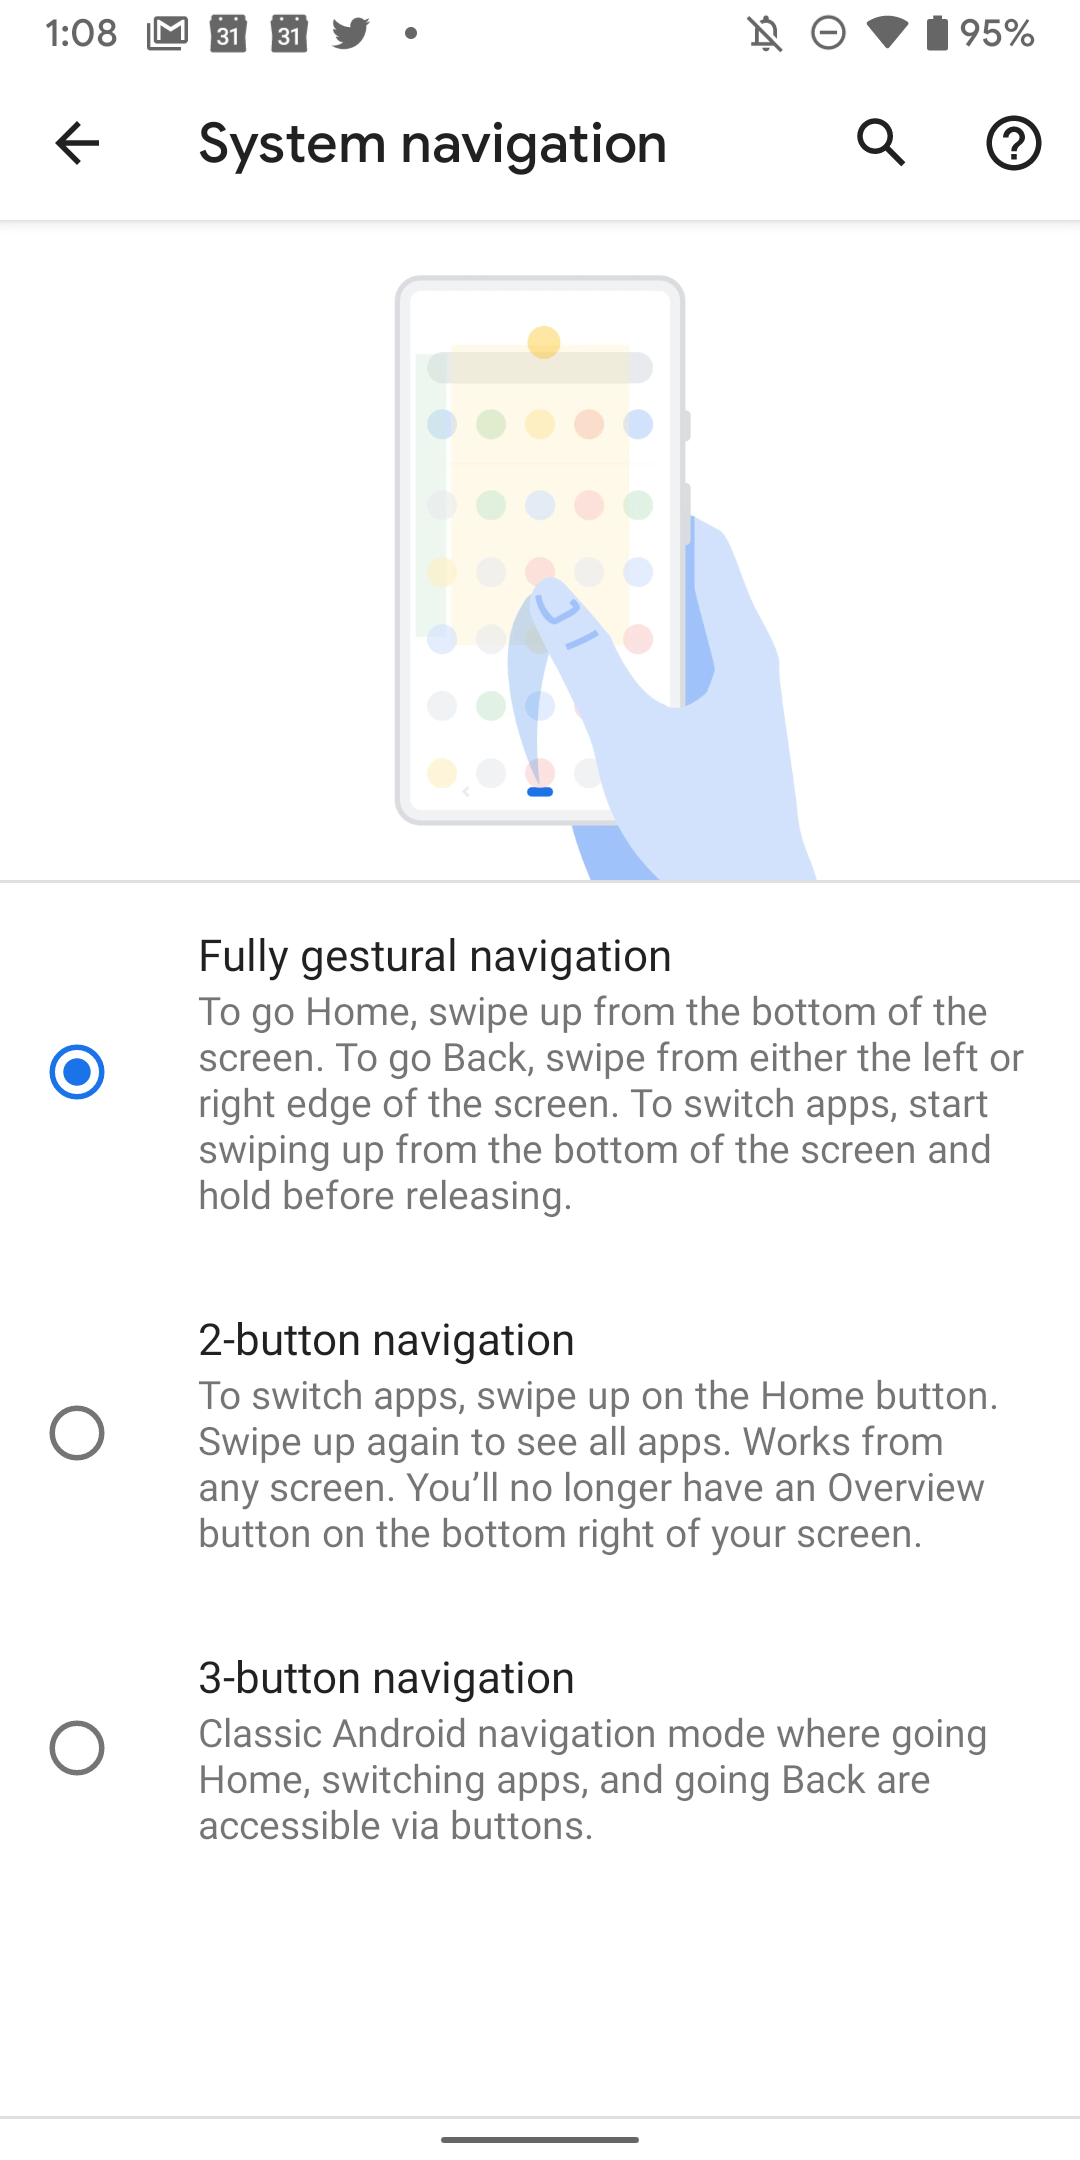 Android's system navigation menu with fully gestural navigation selected.